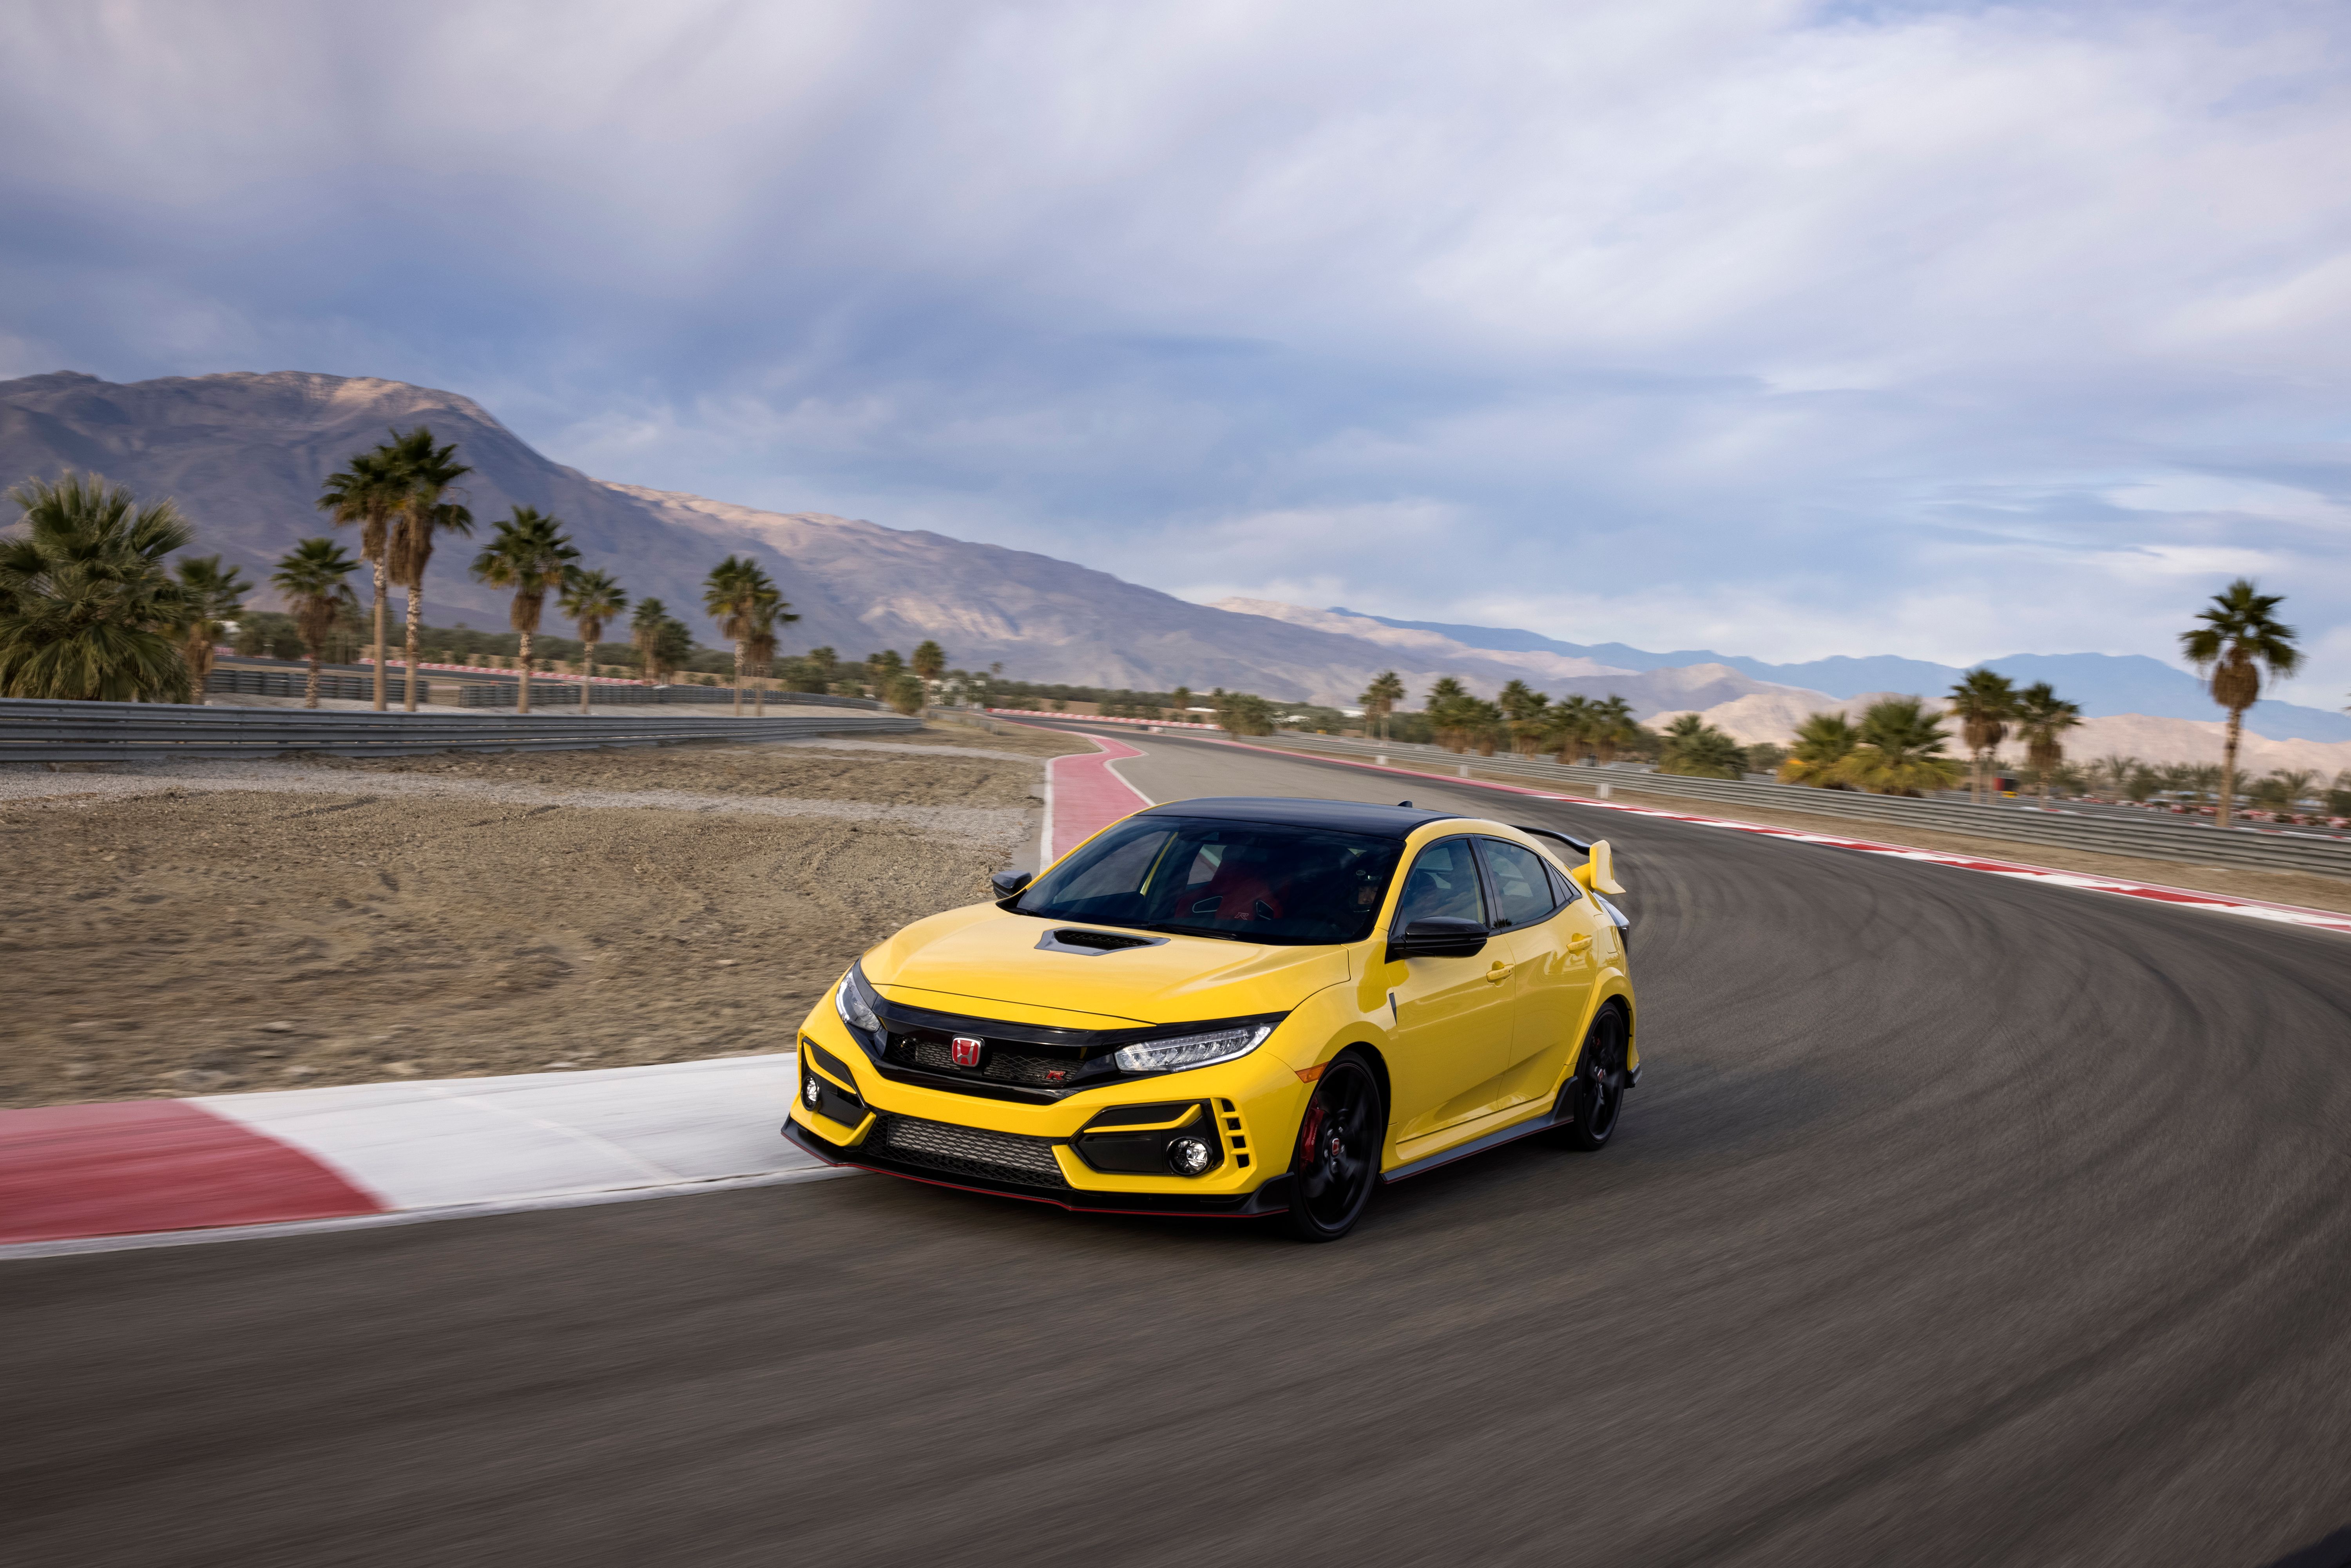 A Civic Type R on track.